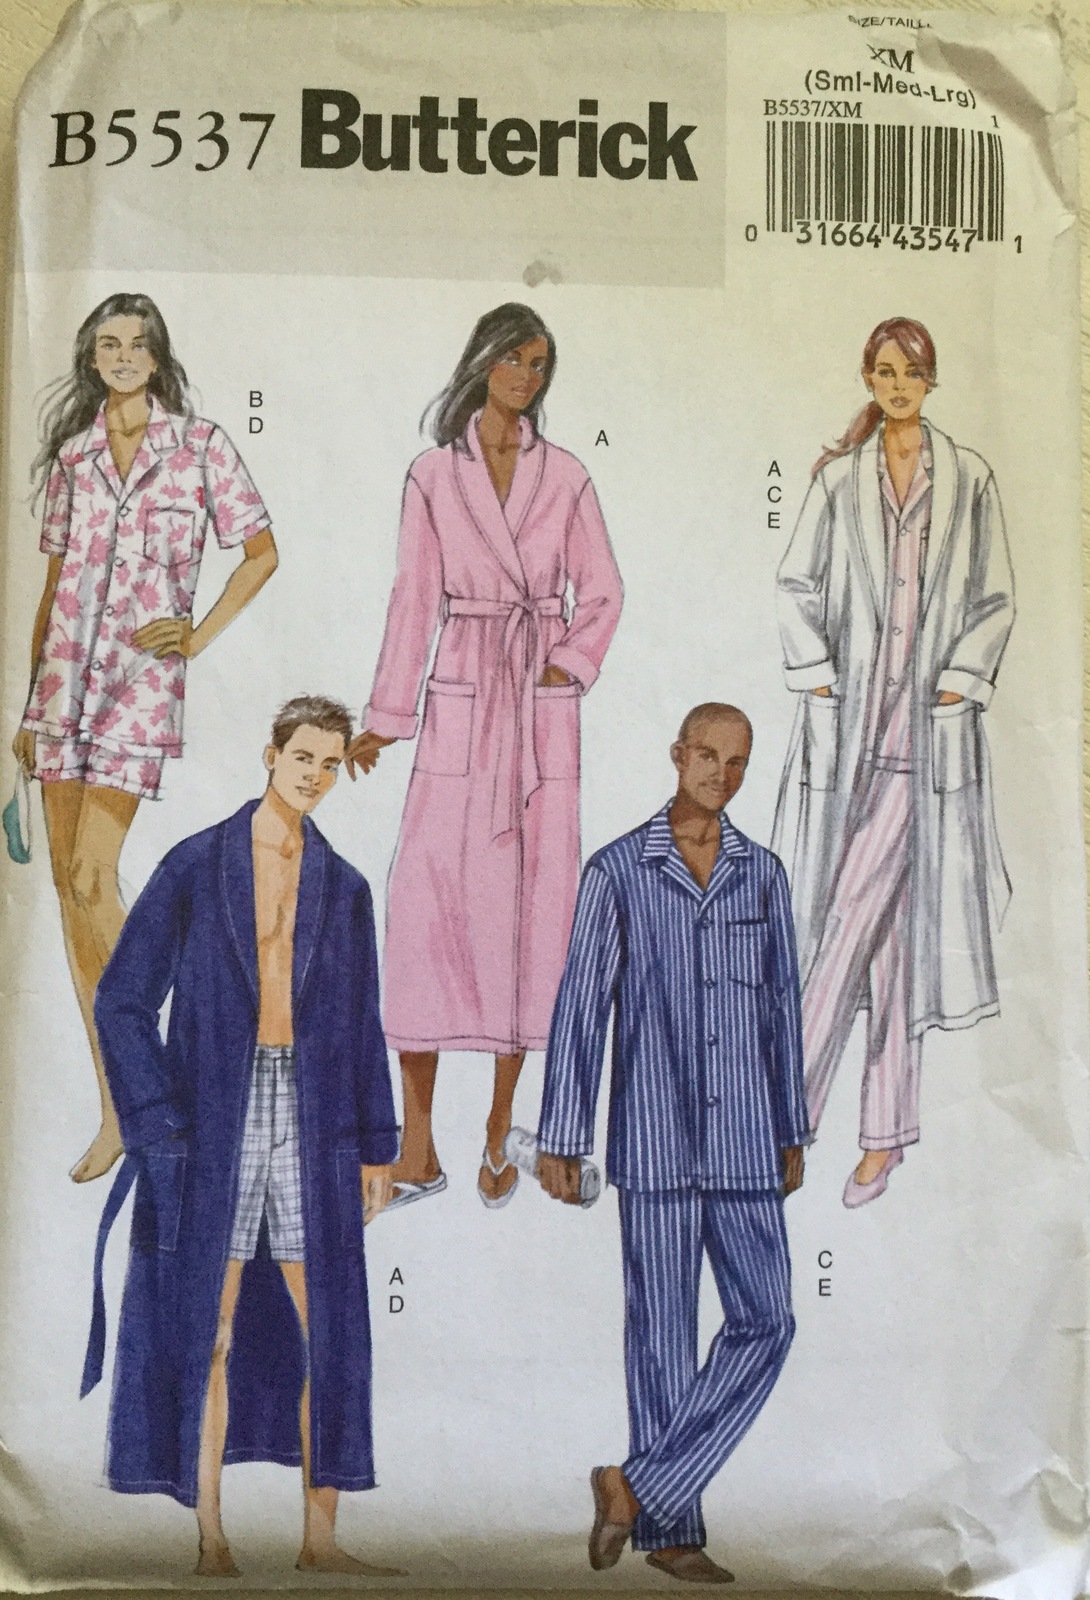 Butterick B5537 Men's & Women's Easy Pajamas with Robe Sizes XM (Sm-Med ...